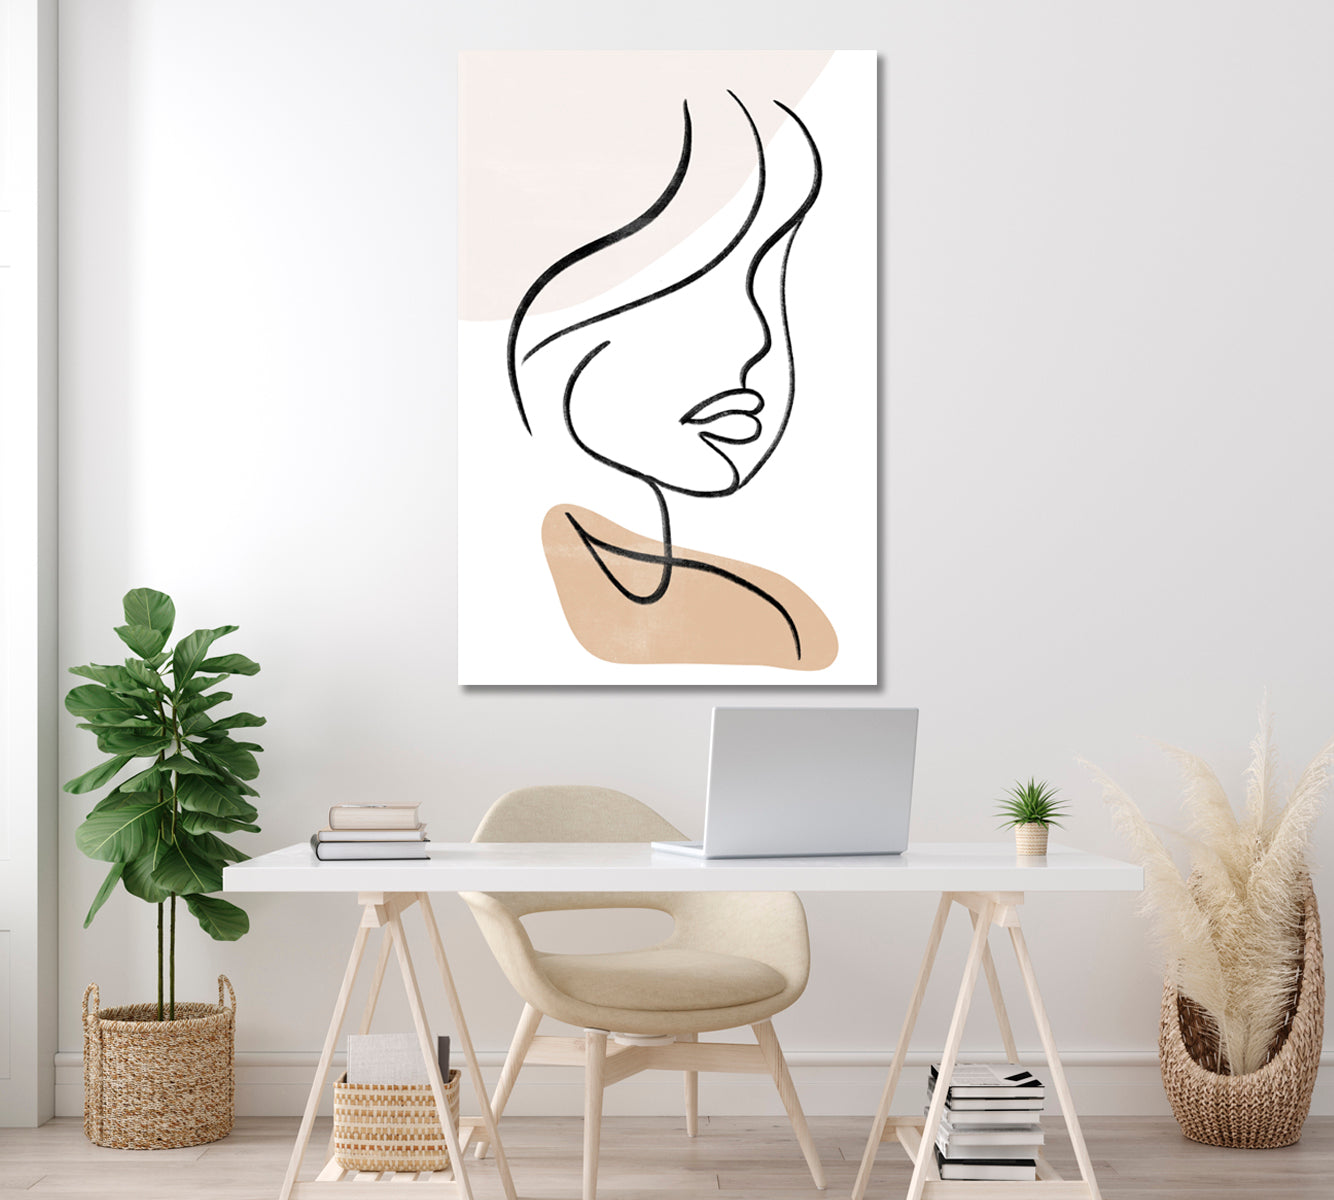 Minimalist Abstract Line Portrait Canvas Print ArtLexy 1 Panel 16"x24" inches 